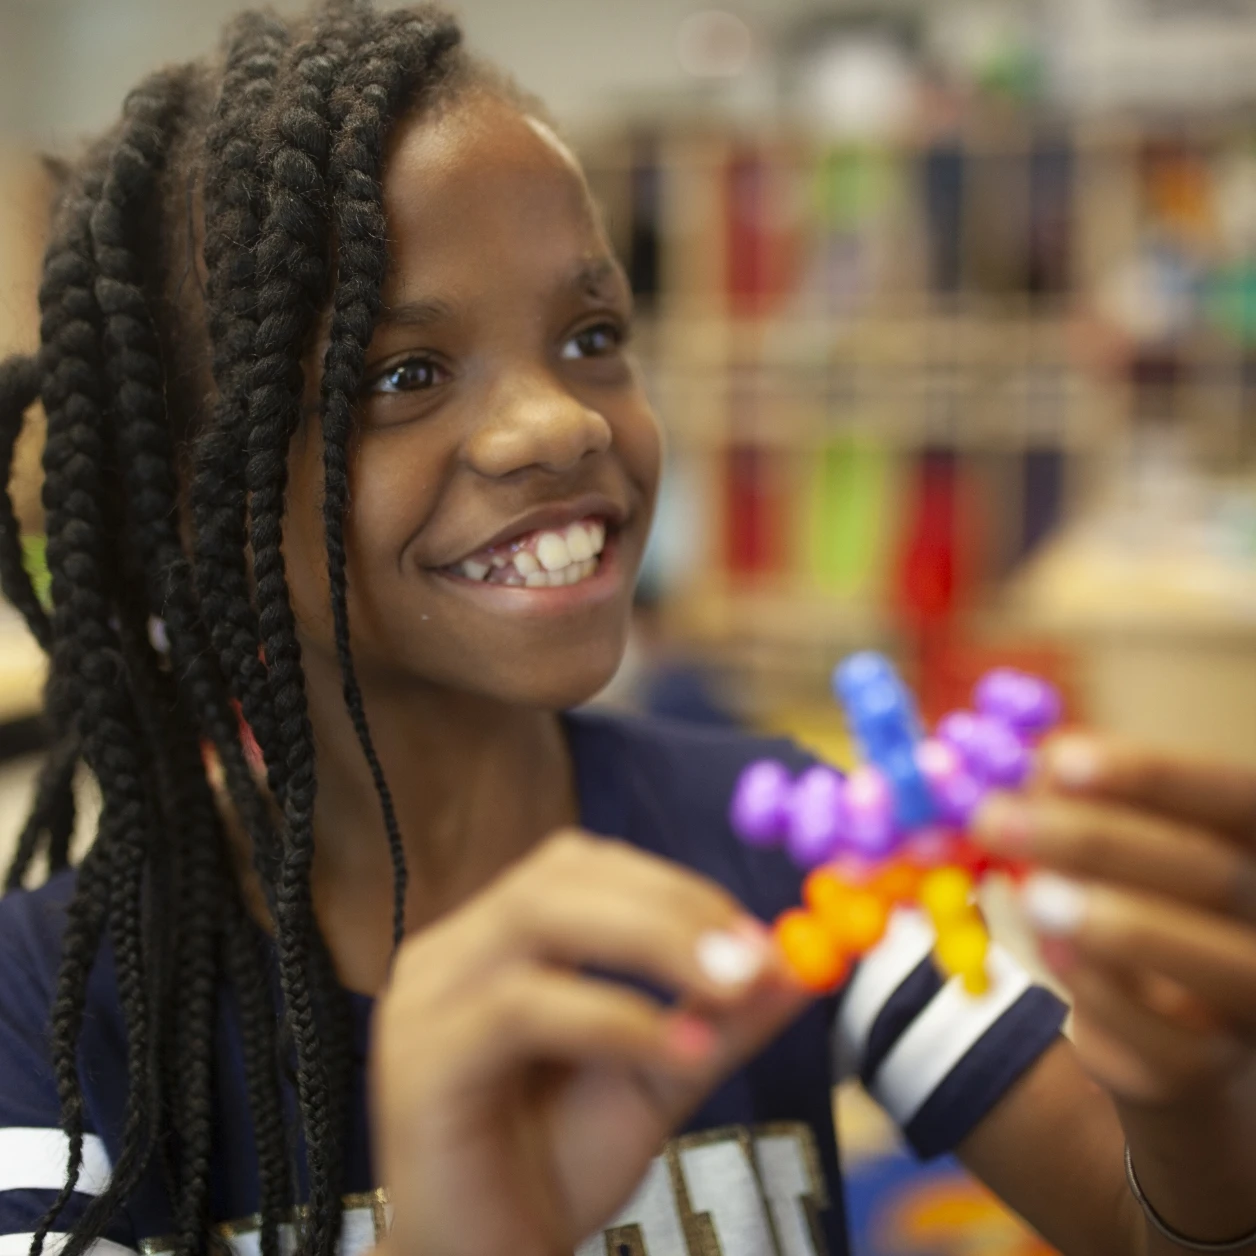 A young girl smiles while playing with colorful blocks in a classroom.